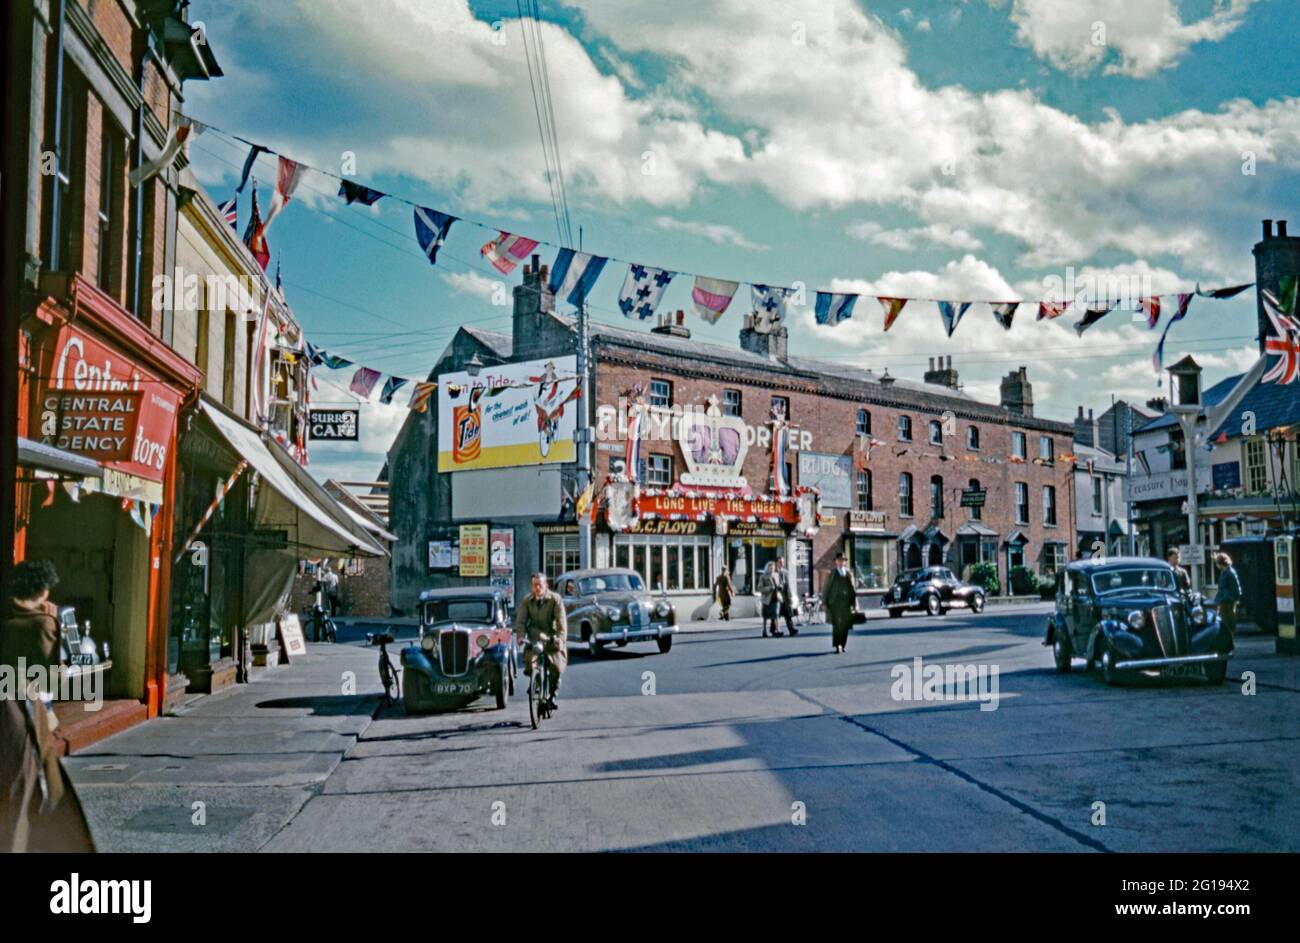 There is colourful bunting across the street, union flags flying and a large sign with a crown and the words ‘Long live the Queen’ in Surrey Street, Littlehampton, West Sussex, England, UK in 1953. This was for the coronation of Elizabeth II which took place on 2 June 1953 at Westminster Abbey, London. Littlehampton is a seaside town, lying on the English Channel on the eastern bank of the River Arun. This image is from an old amateur 35mm Kodak colour transparency – a vintage 1950s photograph. Stock Photo